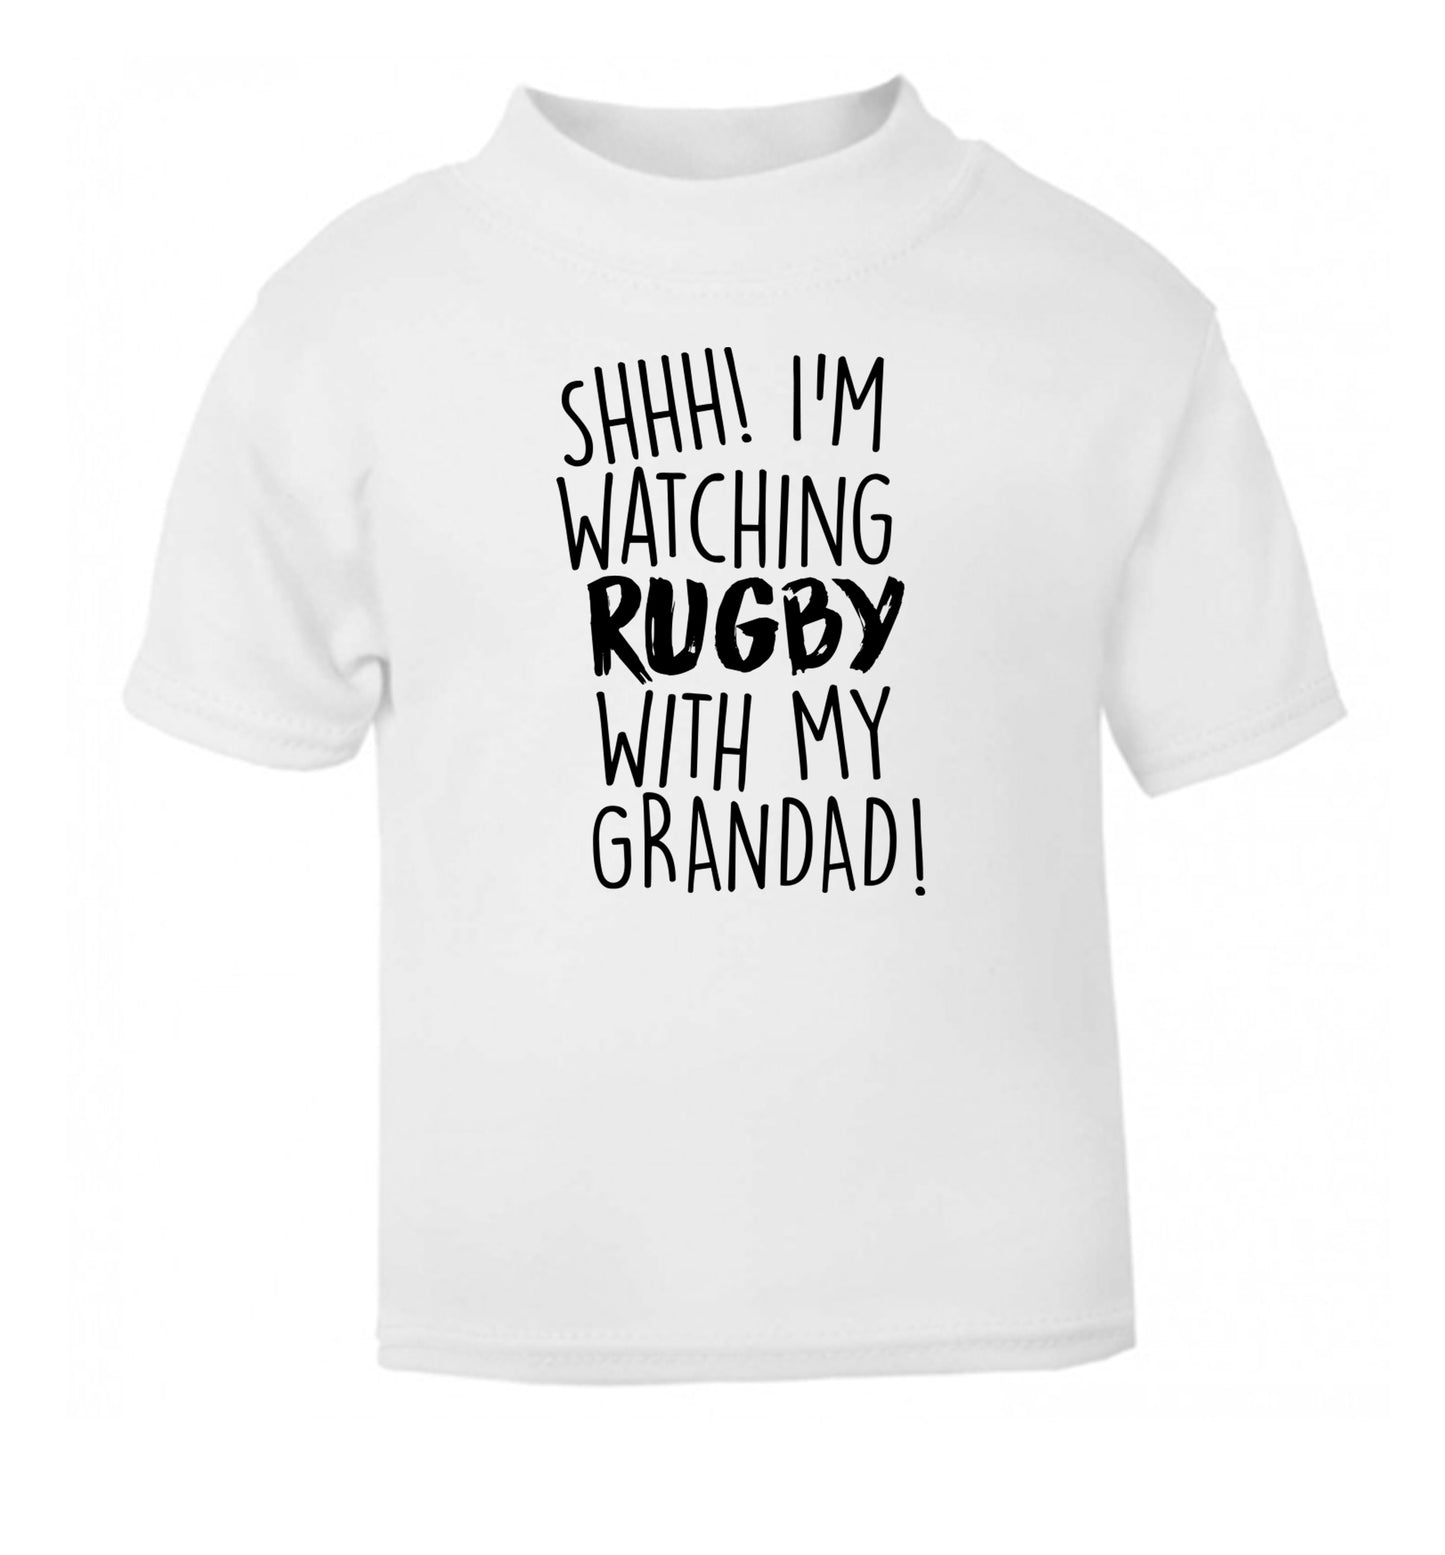 Shh I'm watching rugby with my grandad white Baby Toddler Tshirt 2 Years